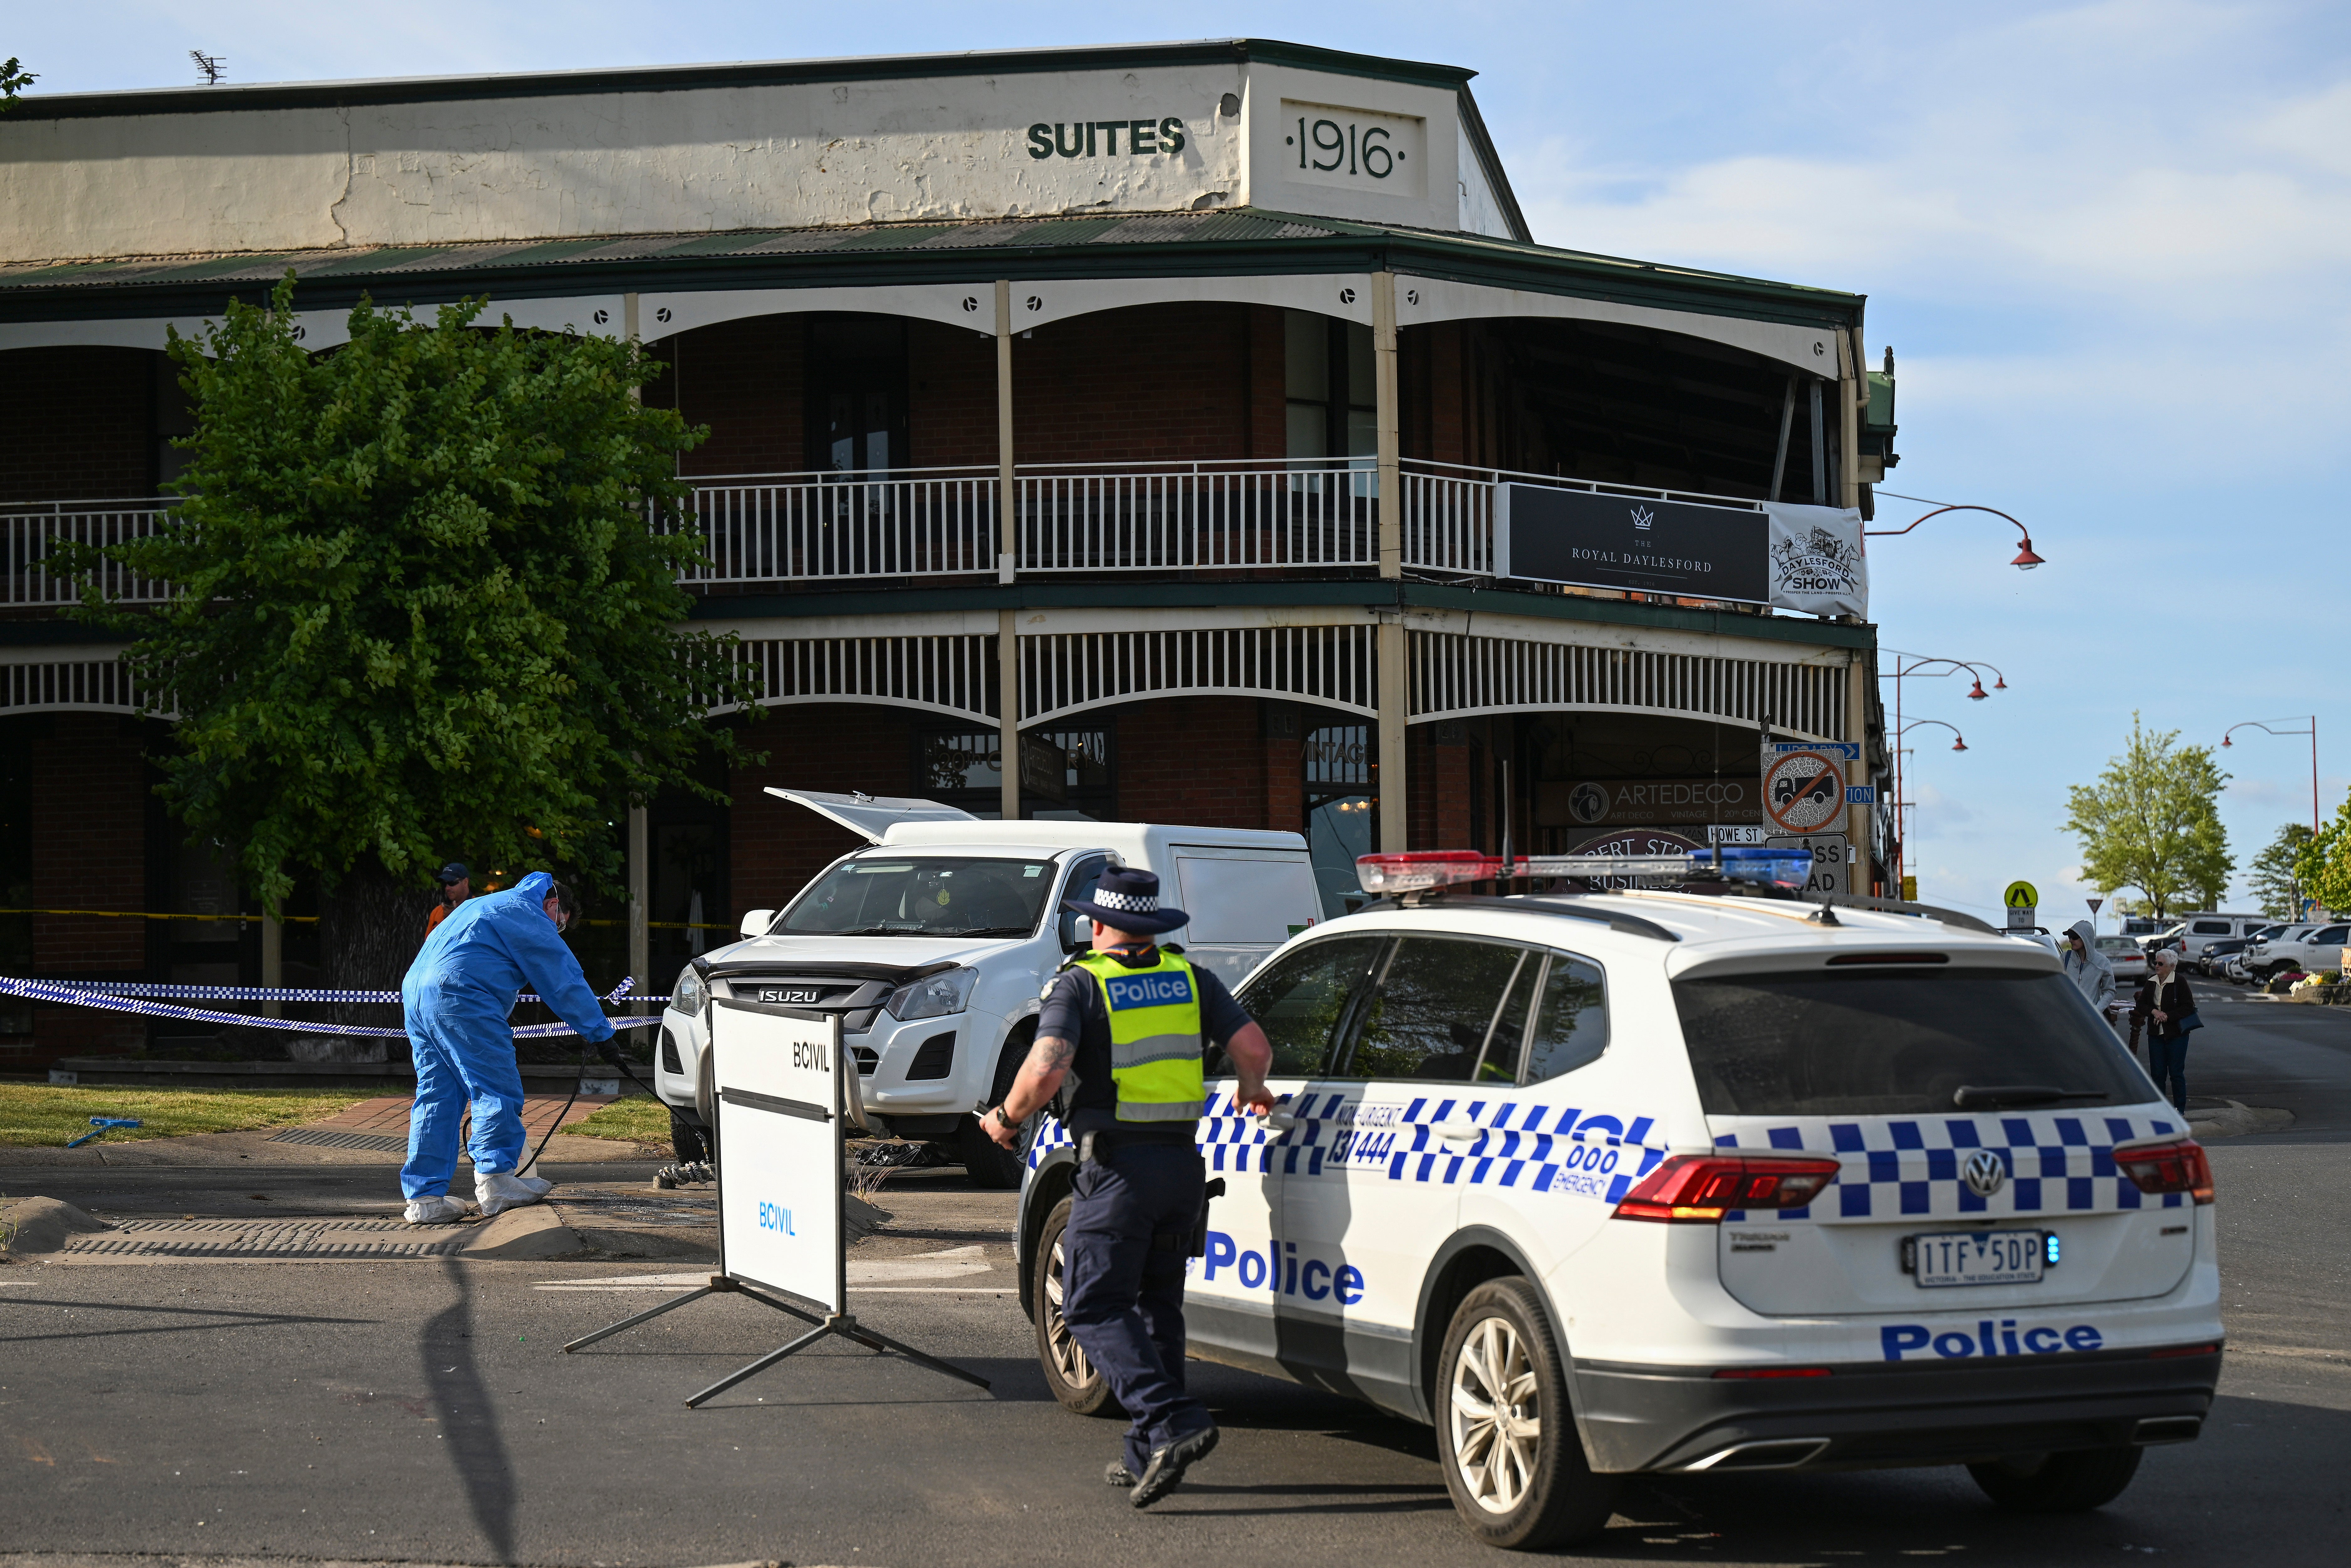 Victorian police work the scene of a deadly car crash outside the Royal Hotel in Daylesford, Australia on Monday